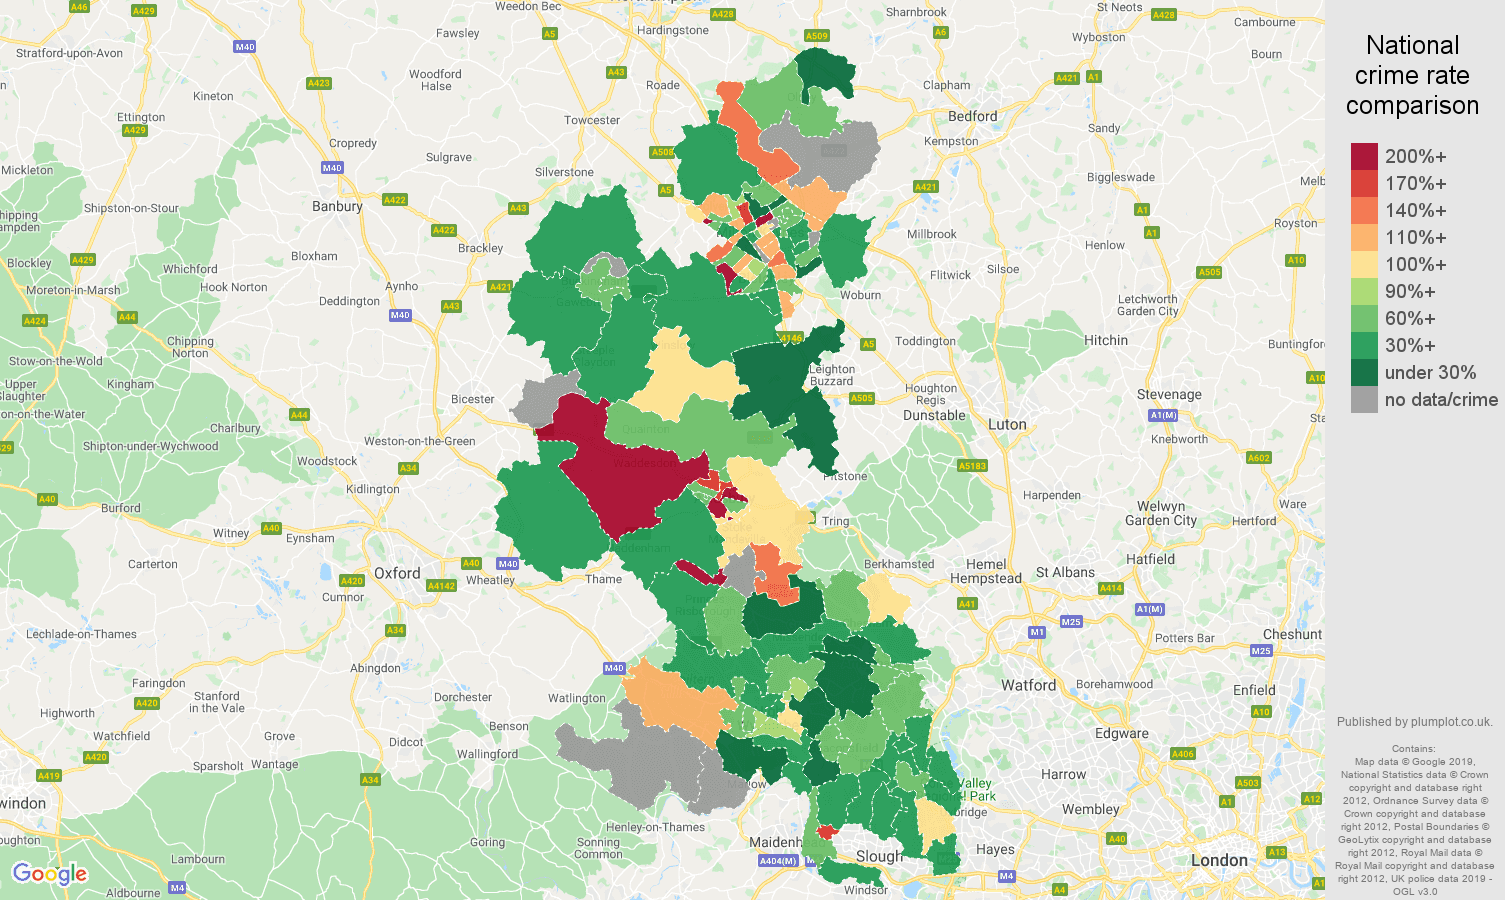 Buckinghamshire other crime rate comparison map